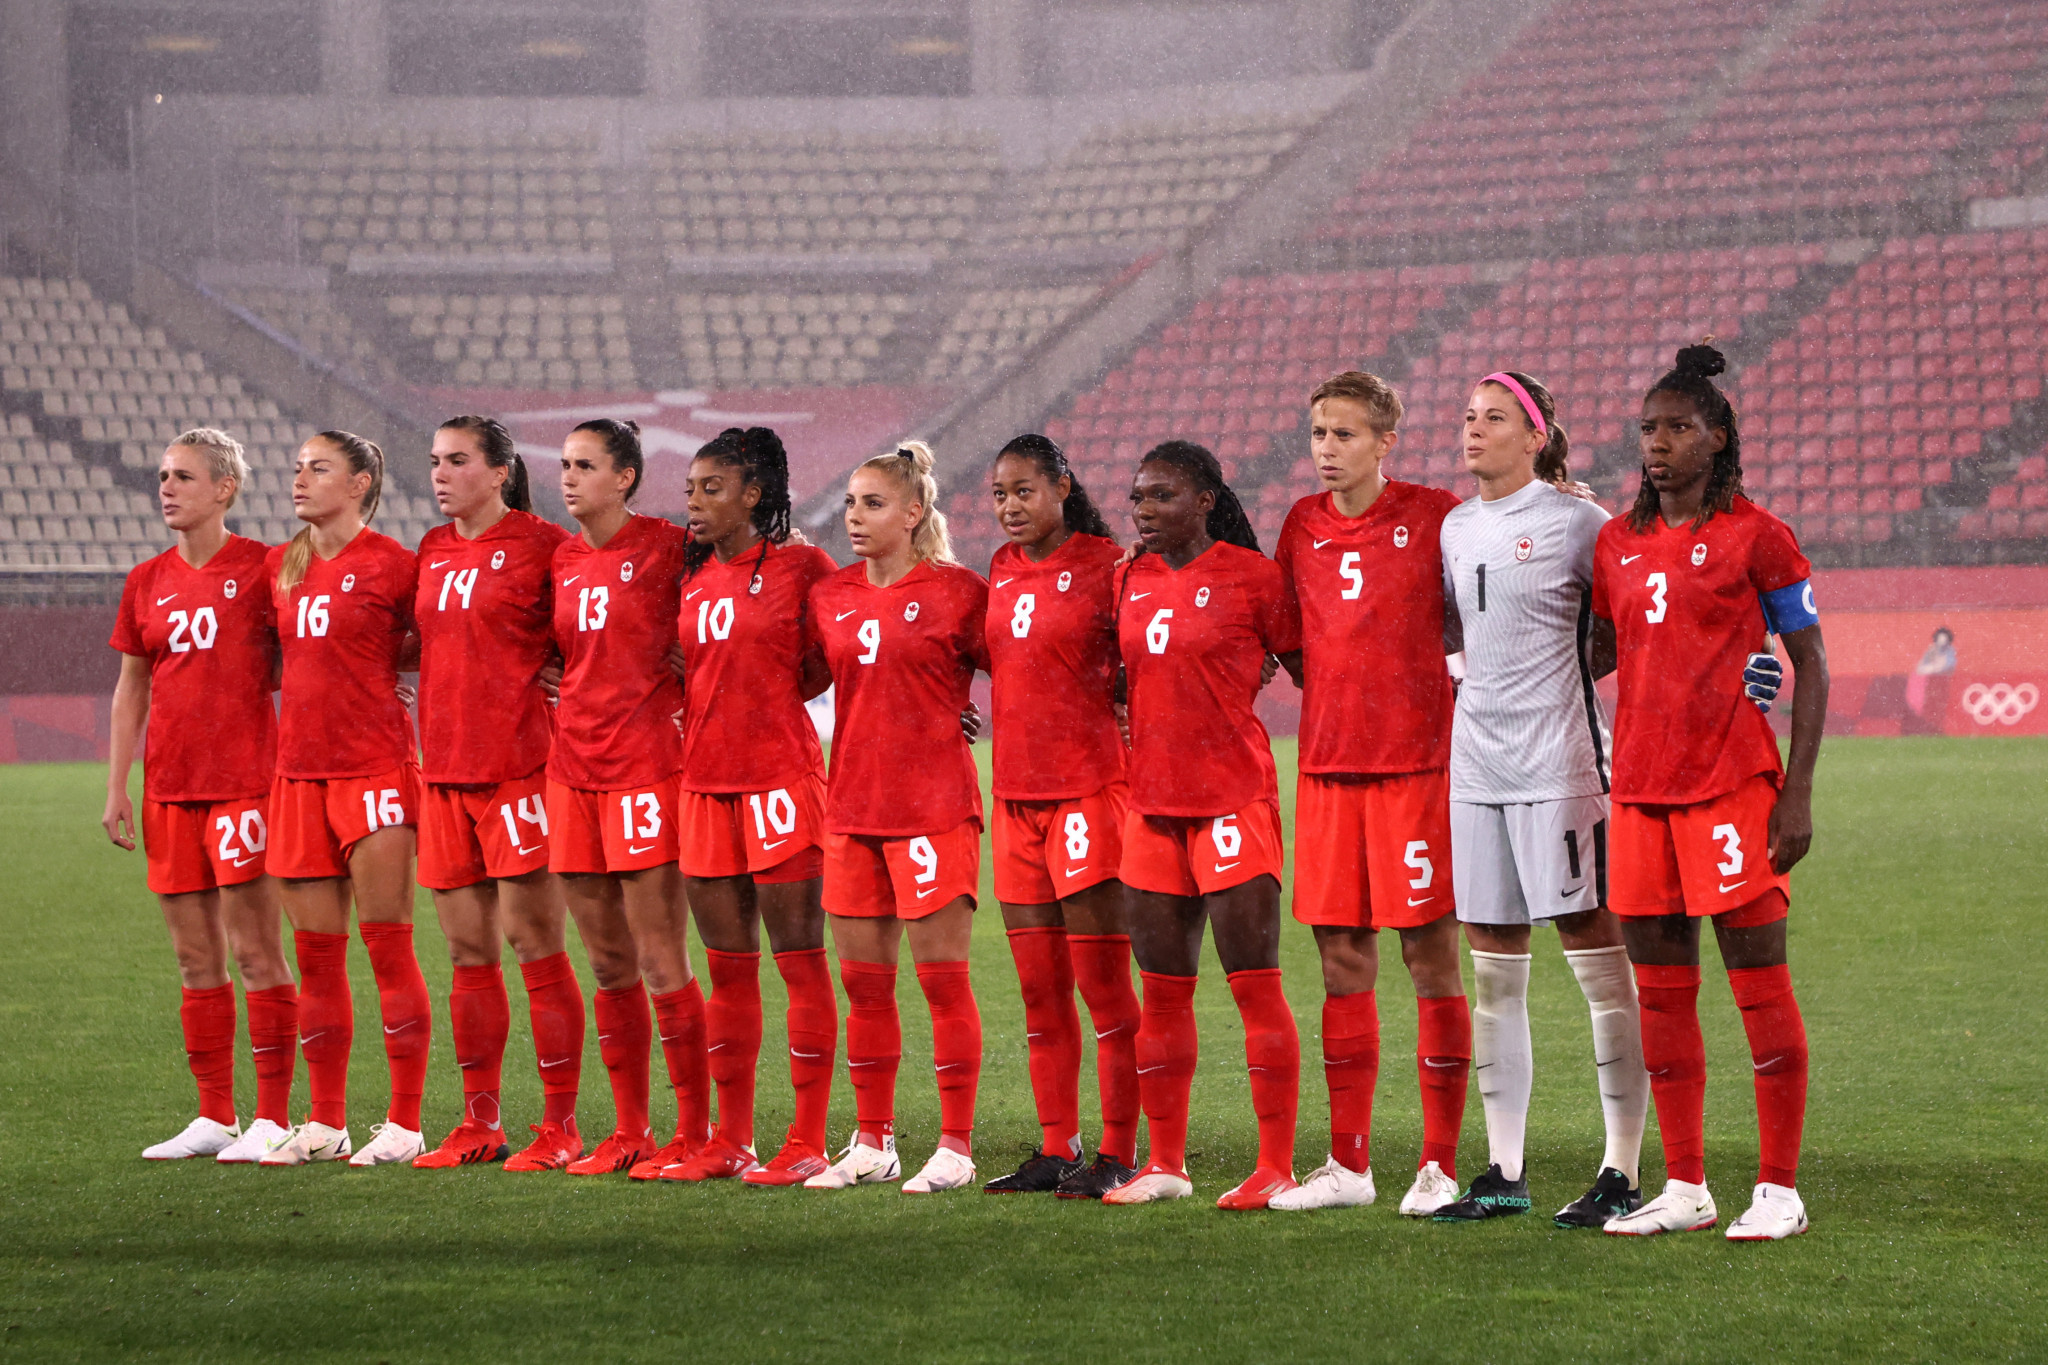 Canadian women's football team considering strike over "outrage" at Canada Soccer